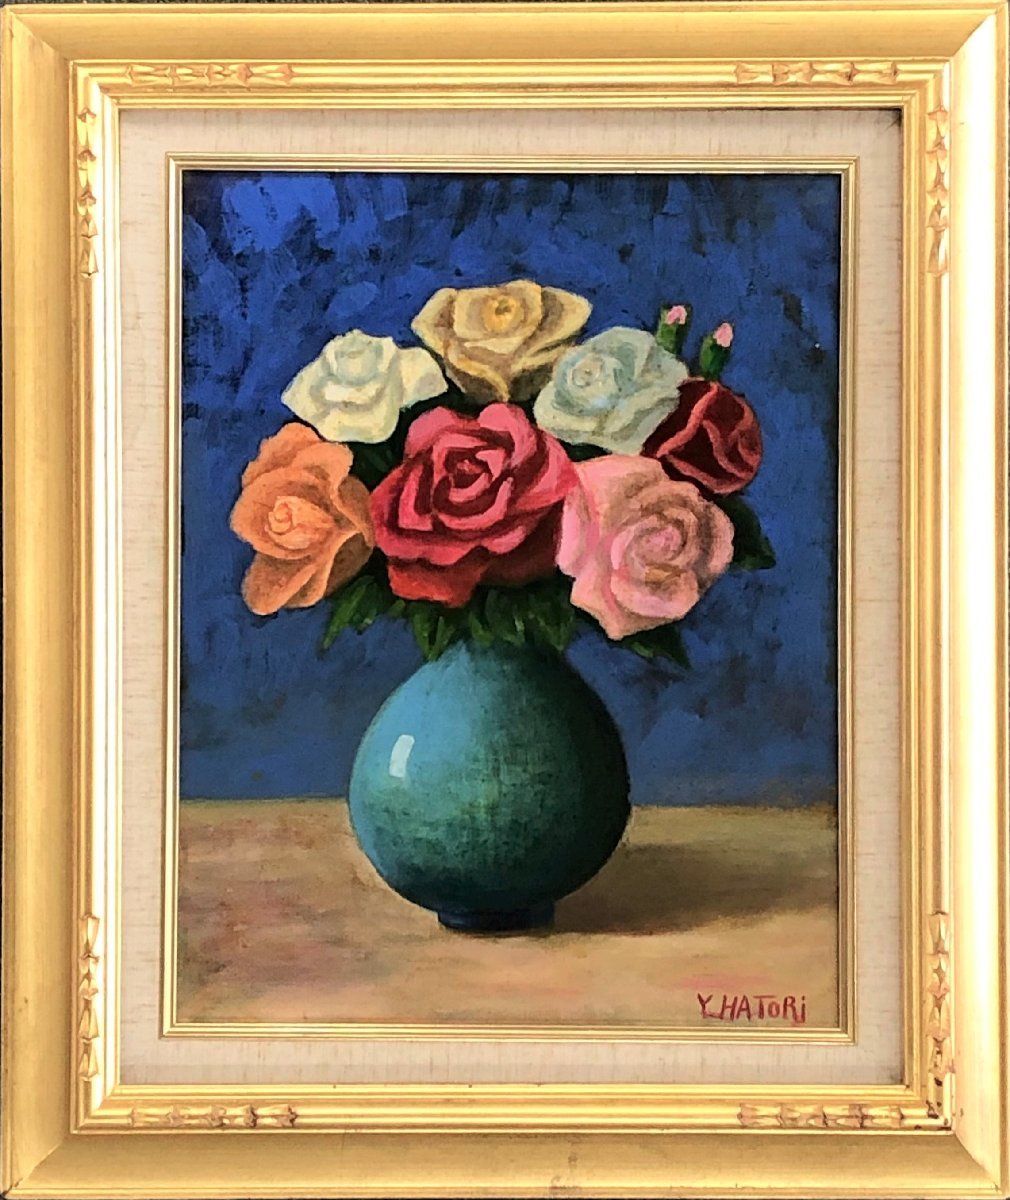 Colorful roses bloom beautifully, This is a very gorgeous piece that seems to give off a fragrant scent. Yoshio Hatori Roses Oil Painting No. 6 [Masami Gallery] K, Painting, Oil painting, Still life